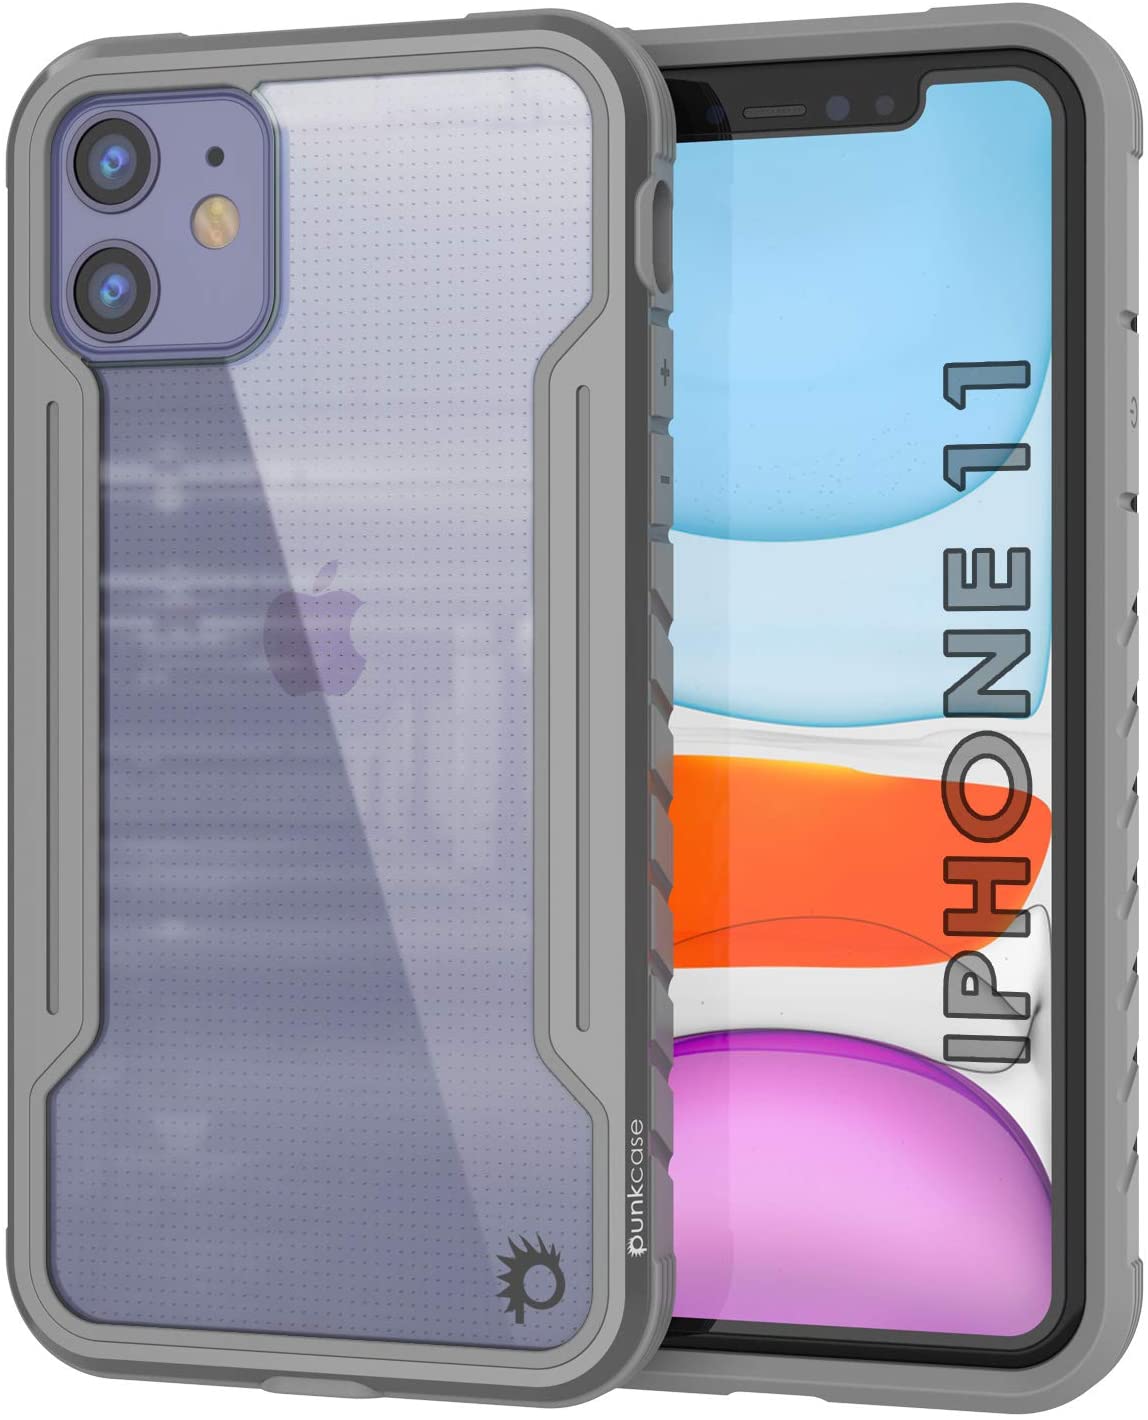 Punkcase iPhone 12 ravenger Case Protective Military Grade Multilayer Cover [Grey]